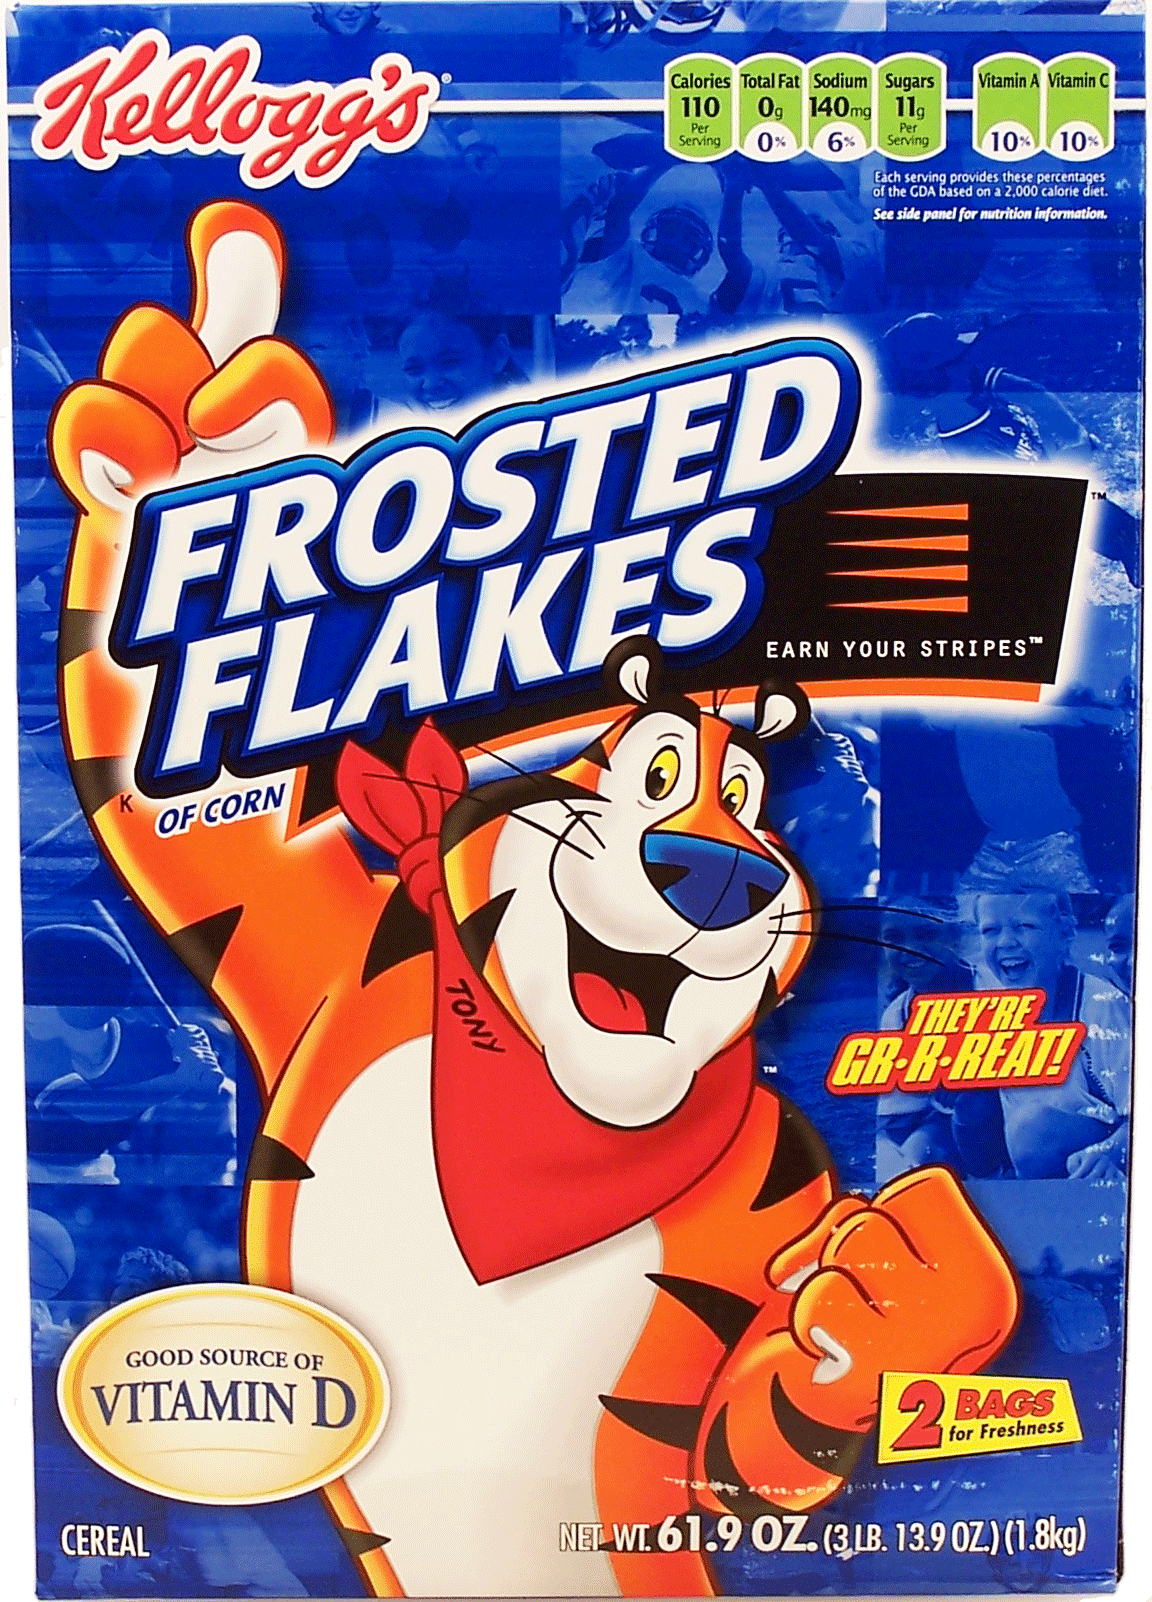 Kellogg's Frosted Flakes sweetened corn flakes, 2 bags Full-Size Picture